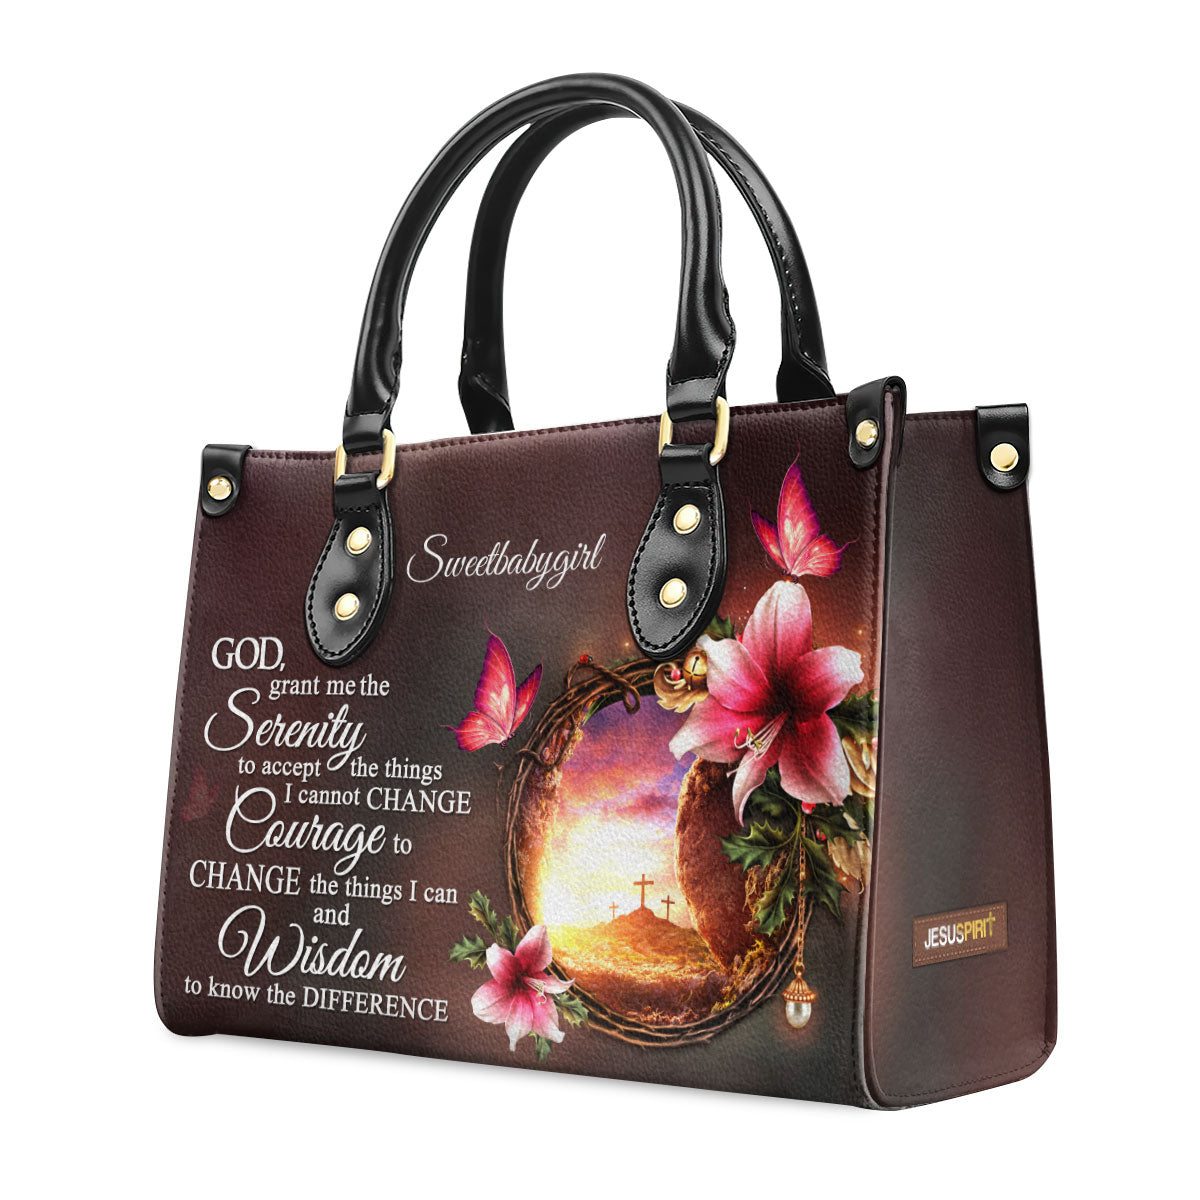 God, Grant Me The Serenity To Accept The Things I Cannot Change - Beautiful Personalized Leather Handbag NUH321